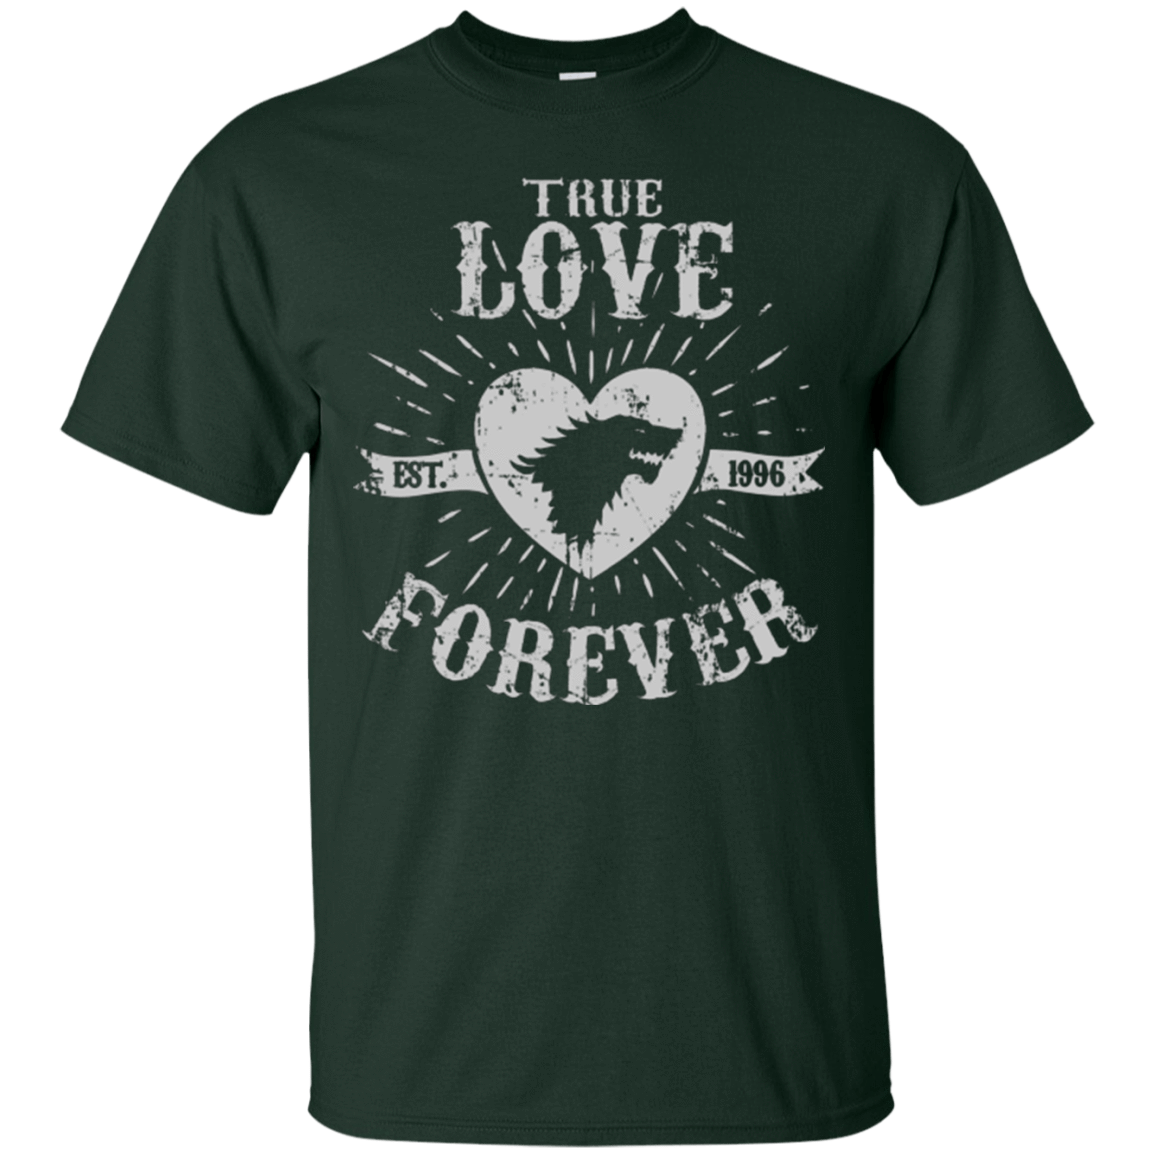 T-Shirts Forest Green / Small True Love Forever Wolf T-Shirt